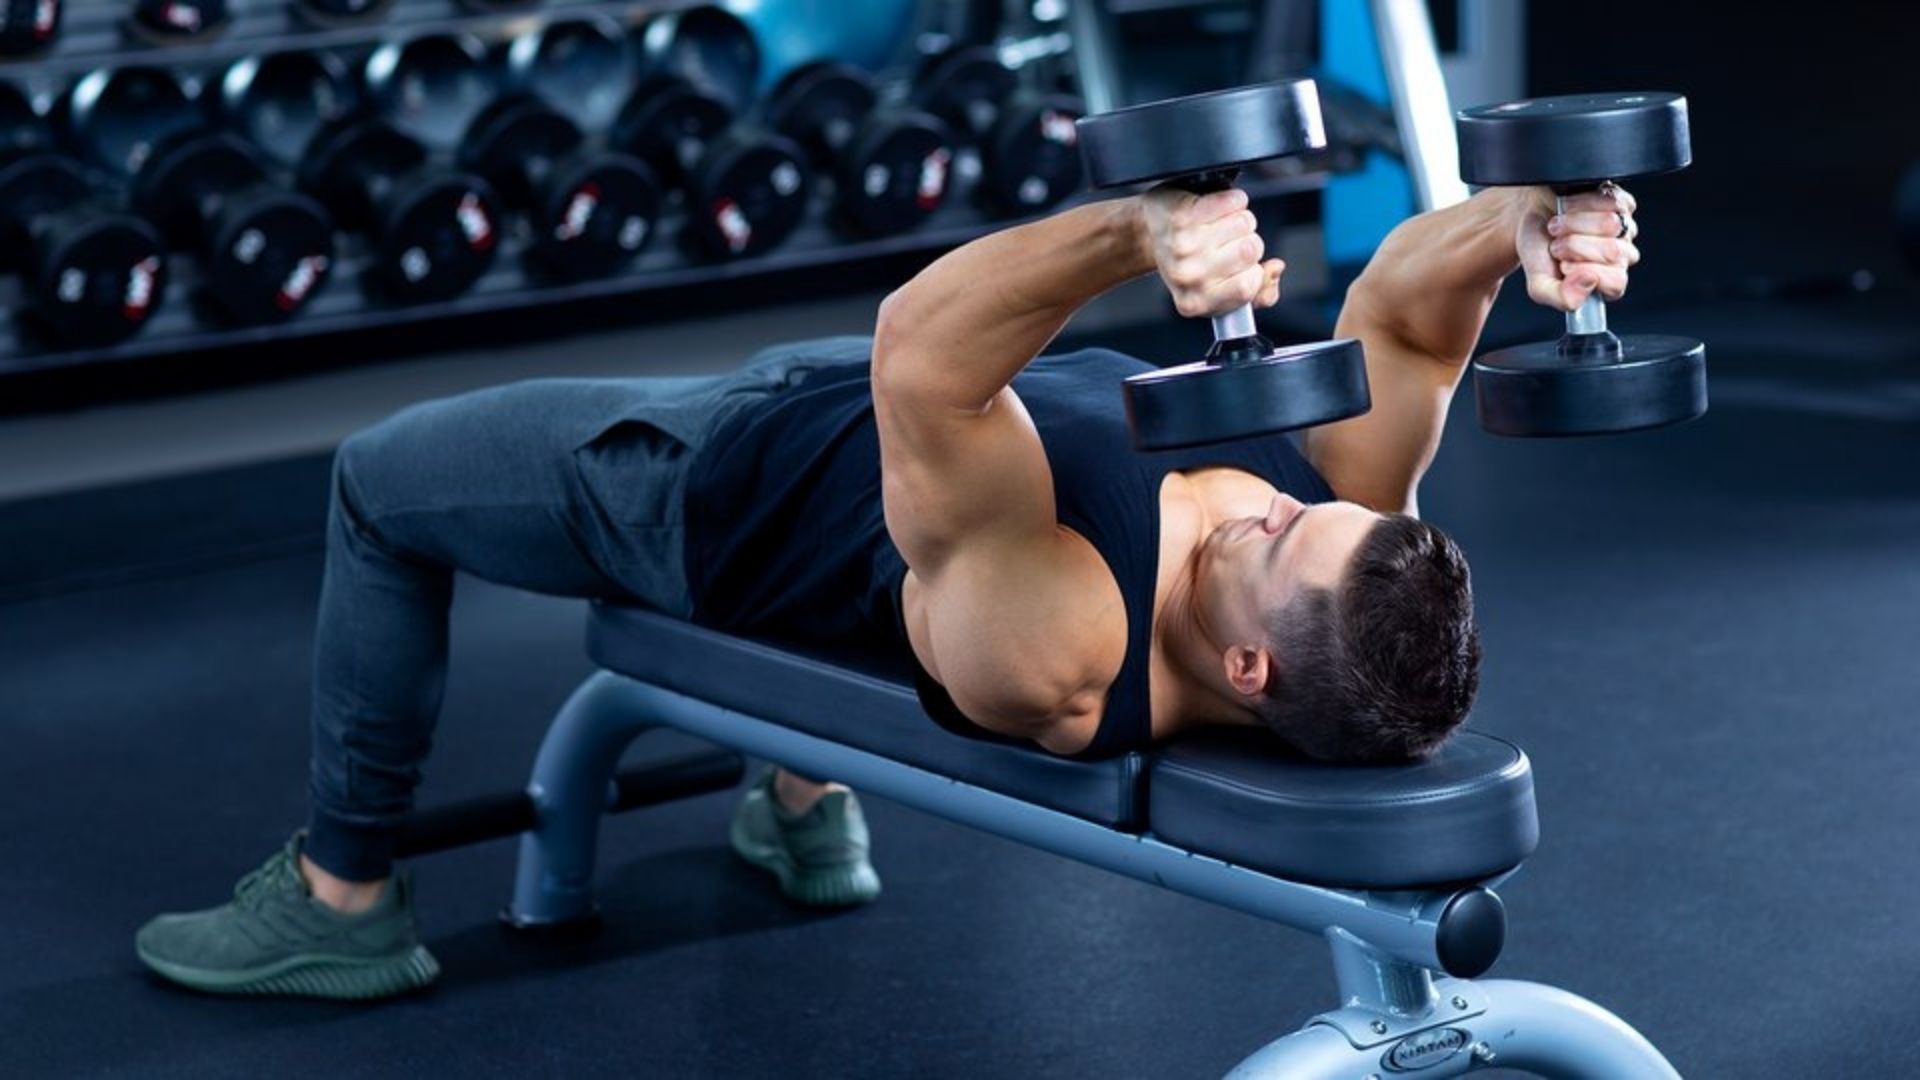 Lying Dumbbell Triceps Extension Will Make Your Triceps Bigger